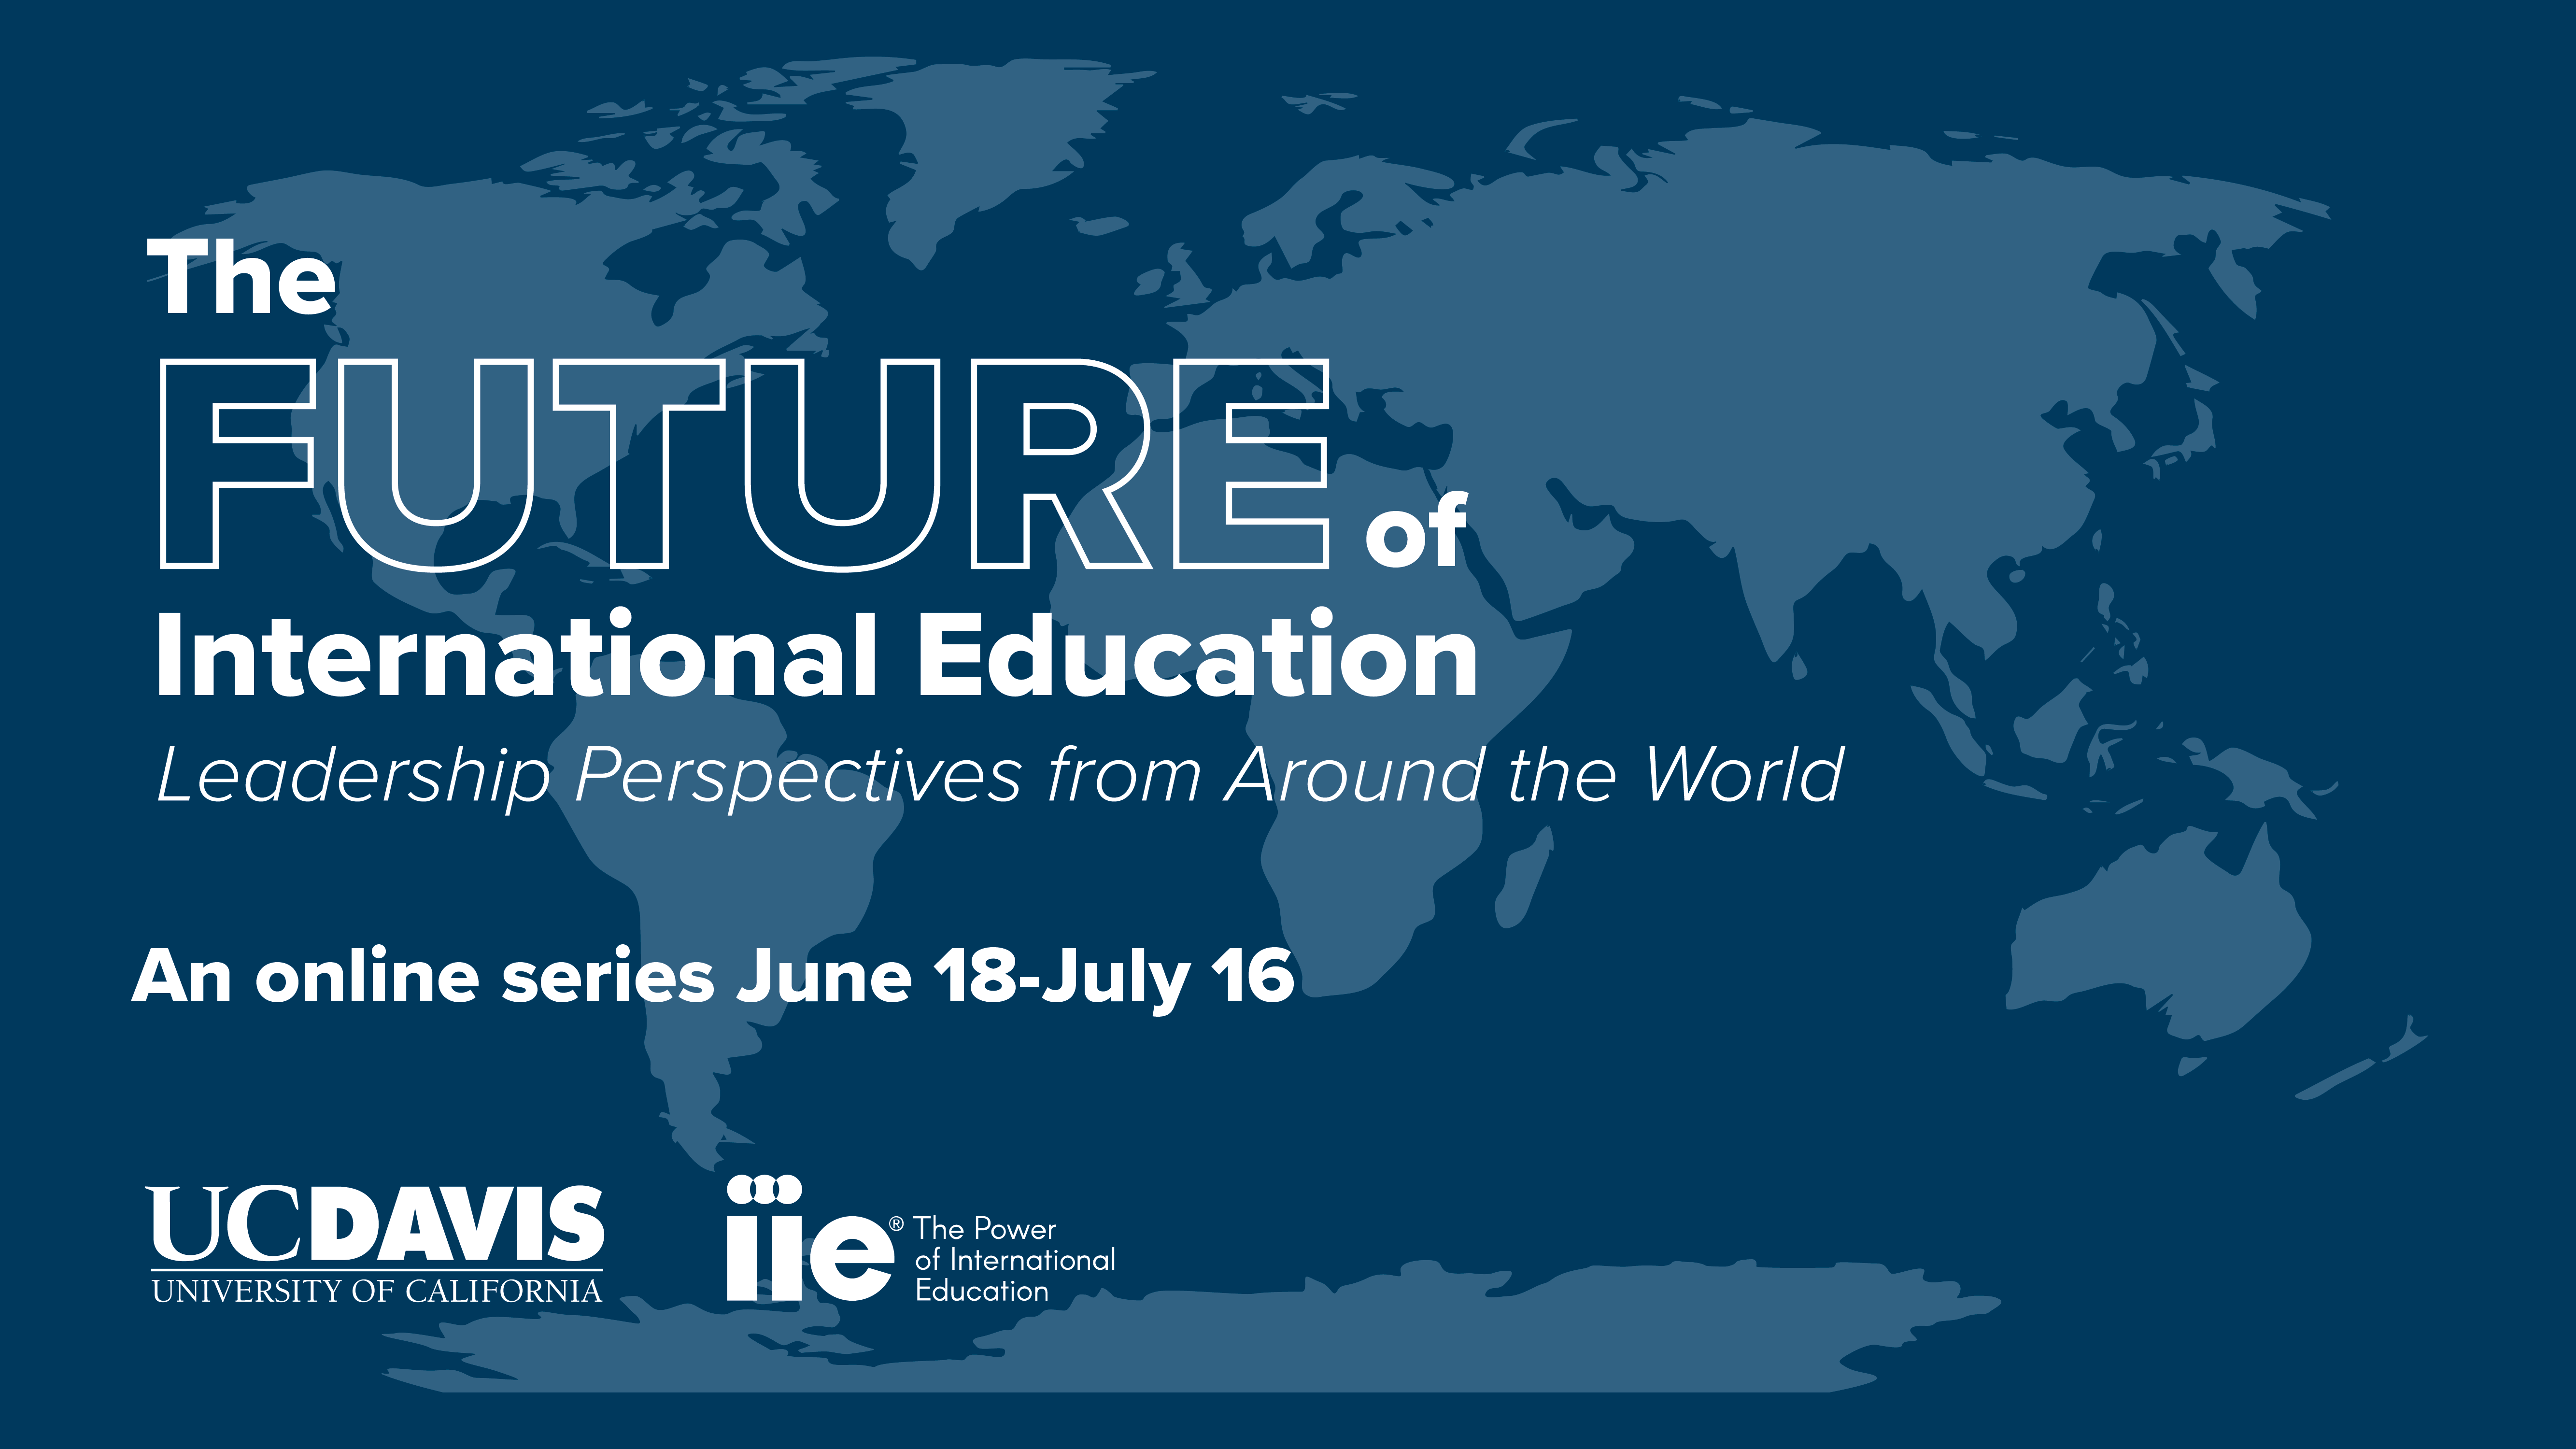 The Future of international Education: Leadership Perspectives from Around the World, an online series June 18- July 16